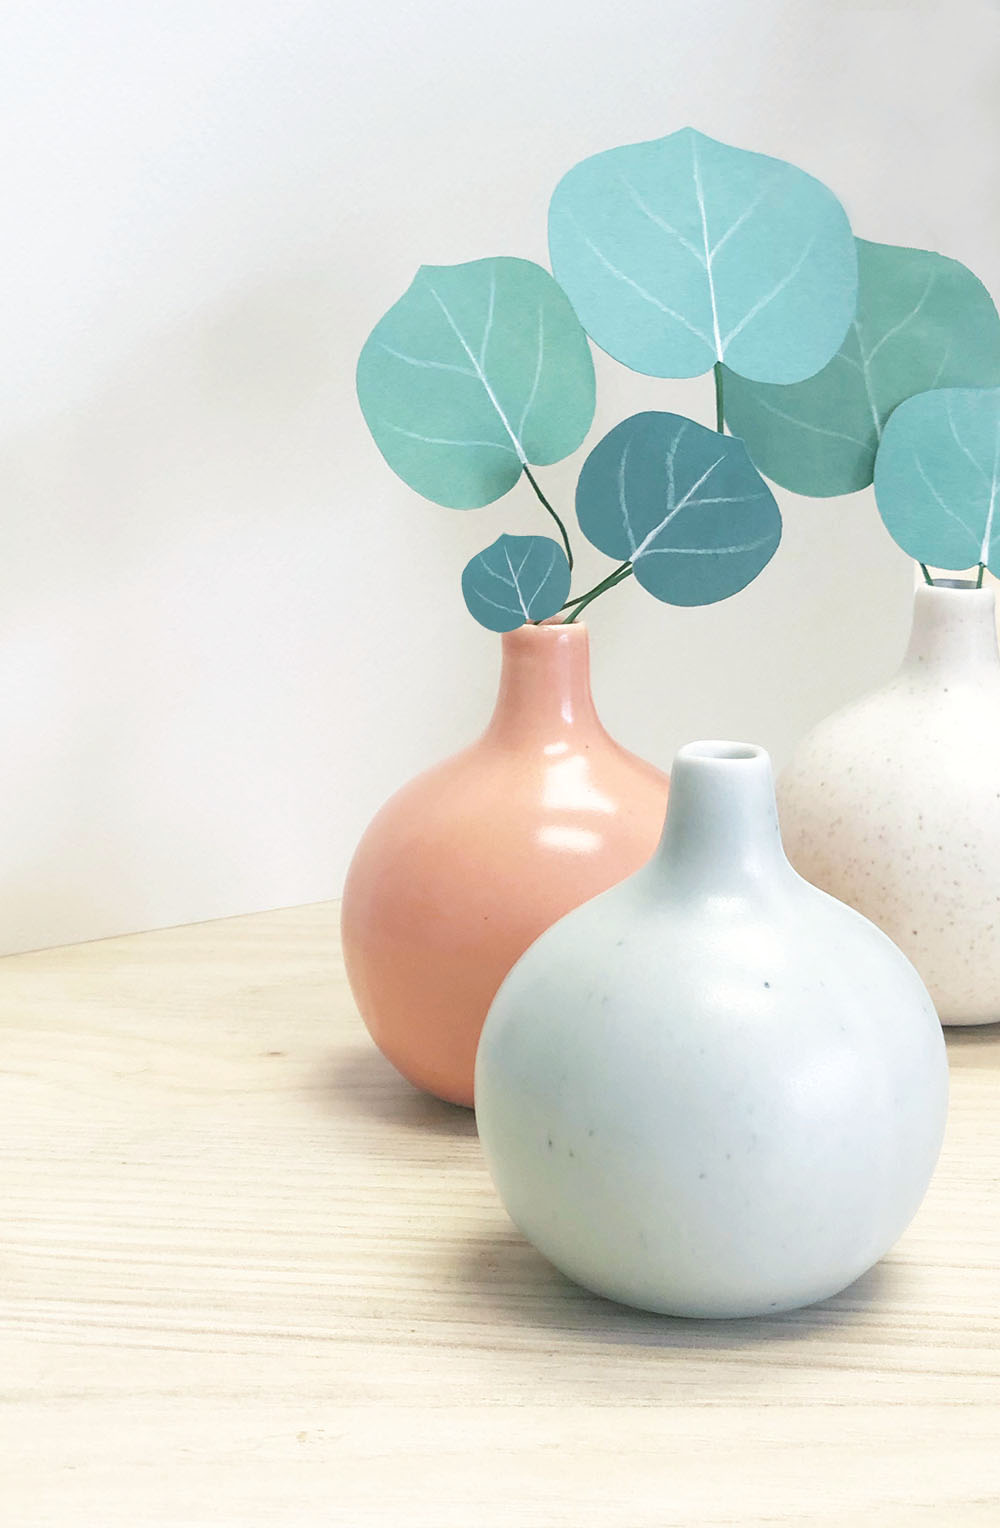 July 2019 Add On Kit of Ceramic Vases to Accompany Hand Crafted Paper Foliage Workshop